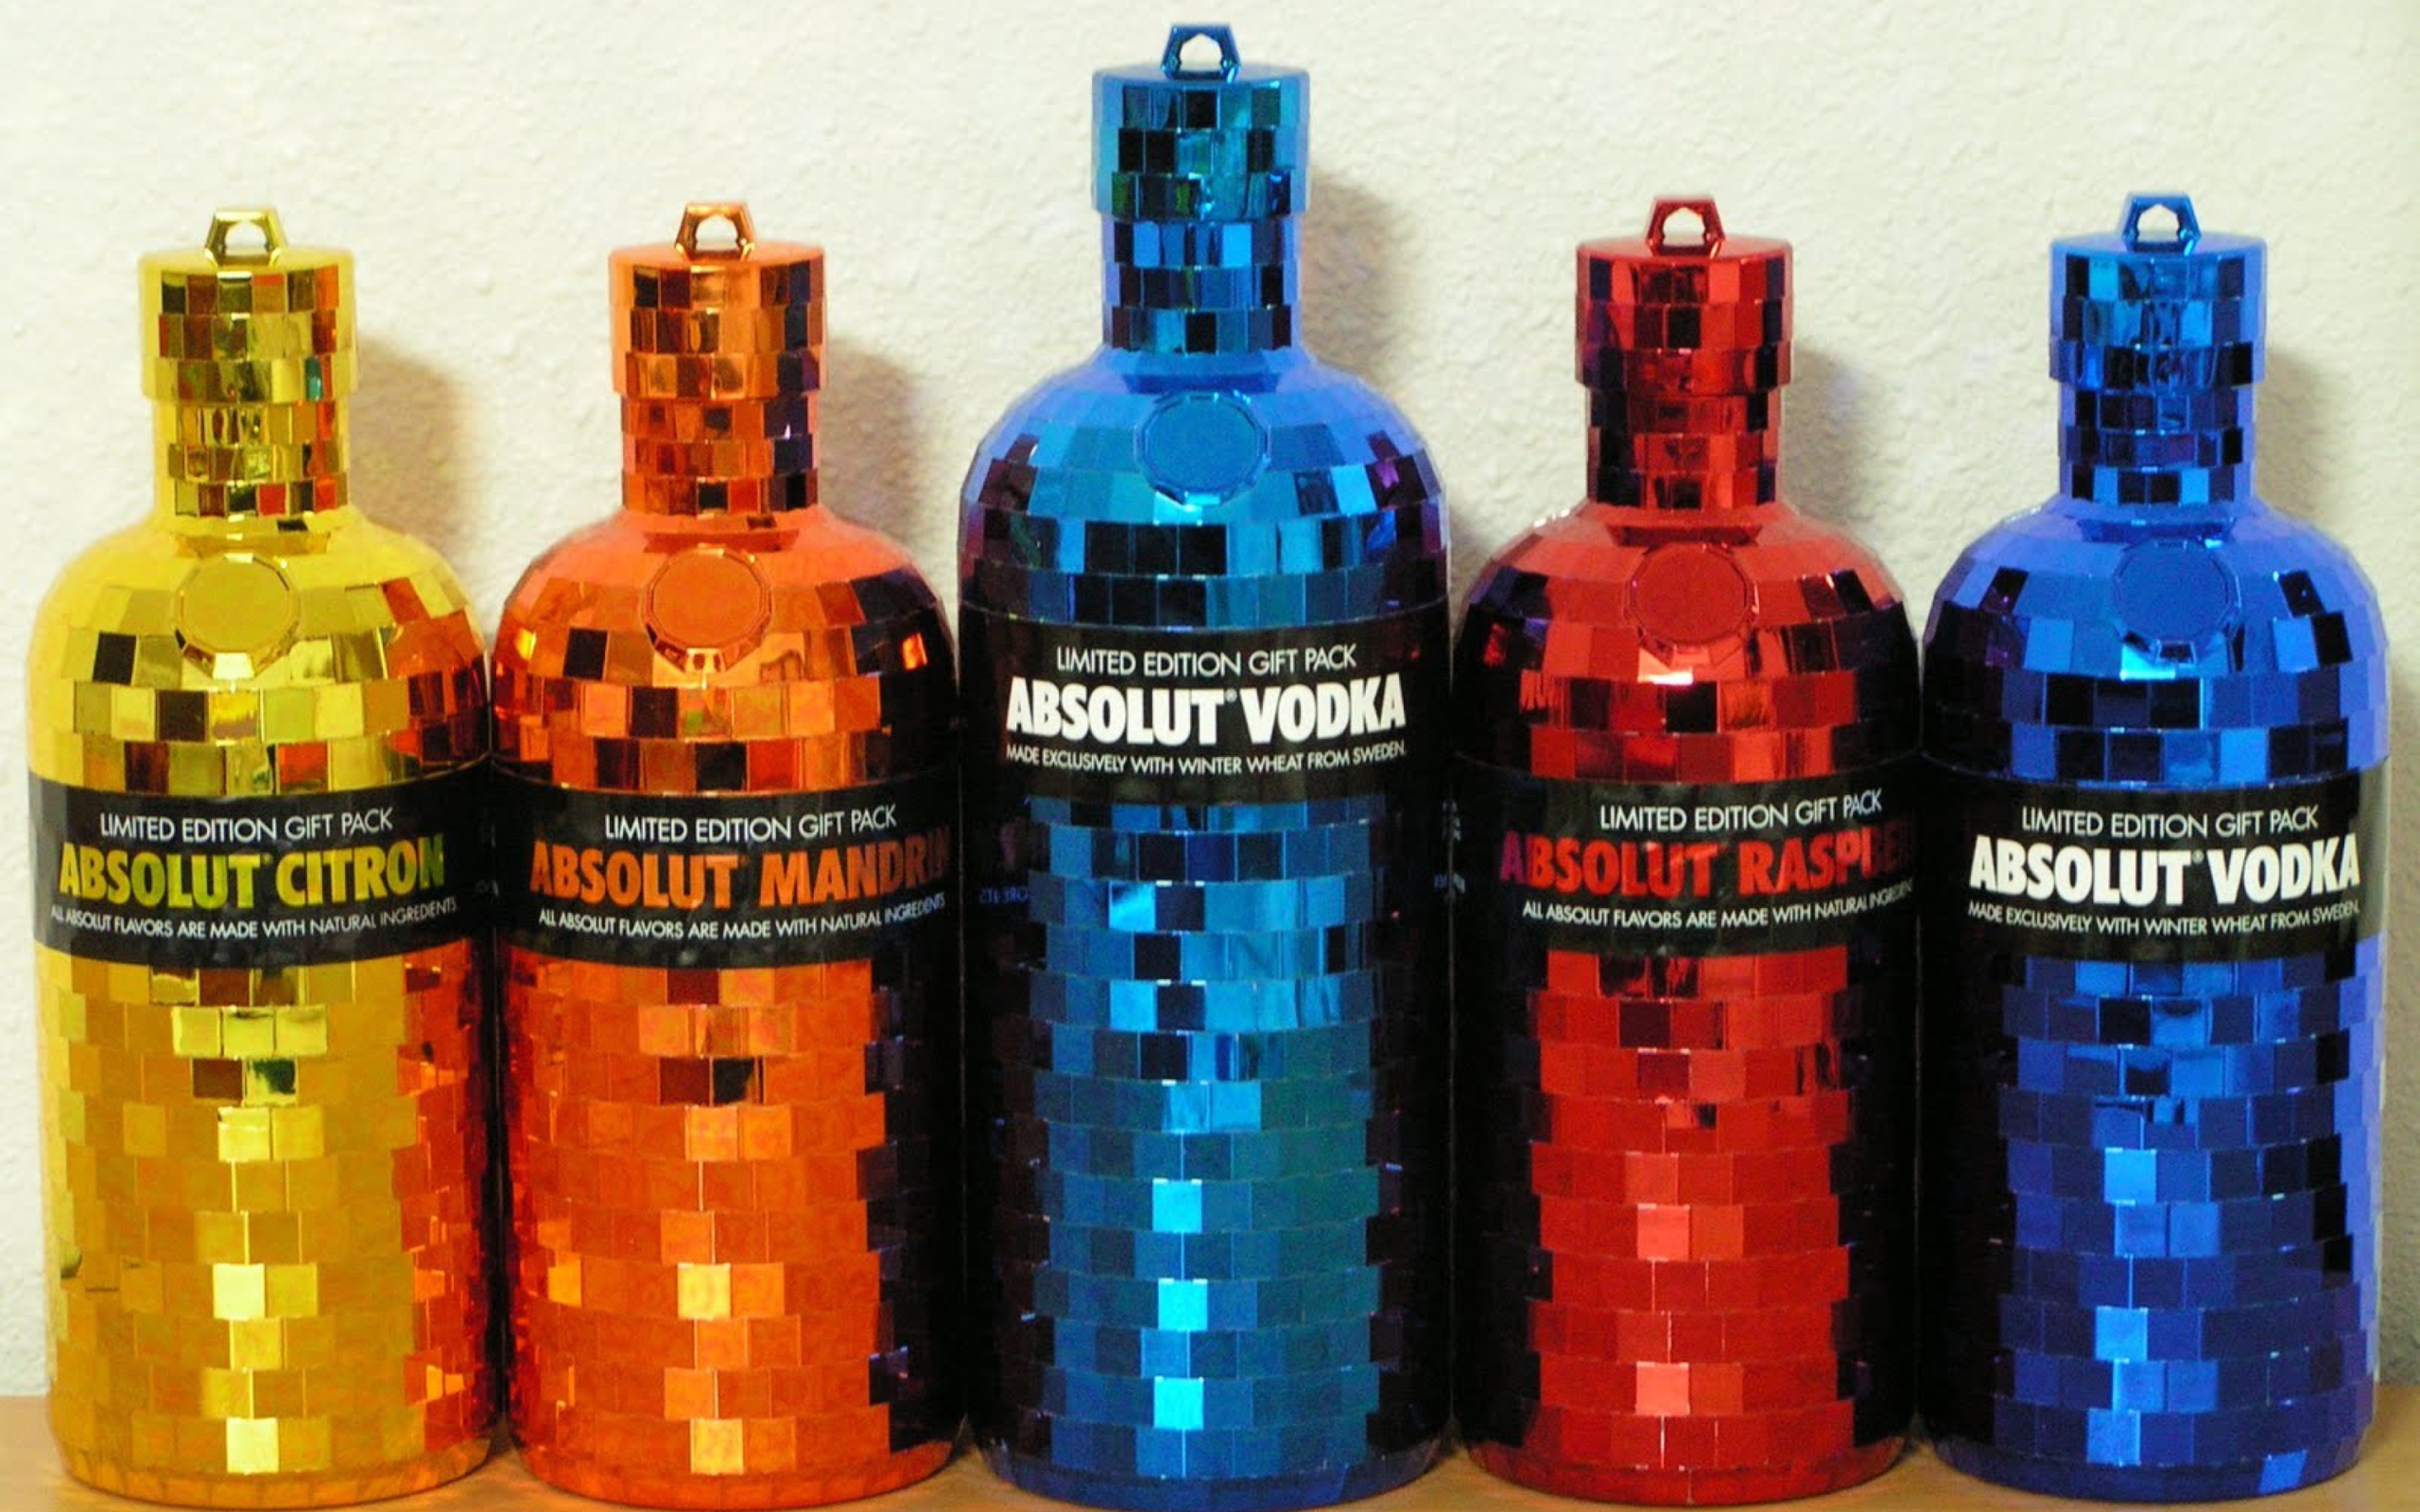 Absolut Vodka Limited Edition wallpaper 2560x1600